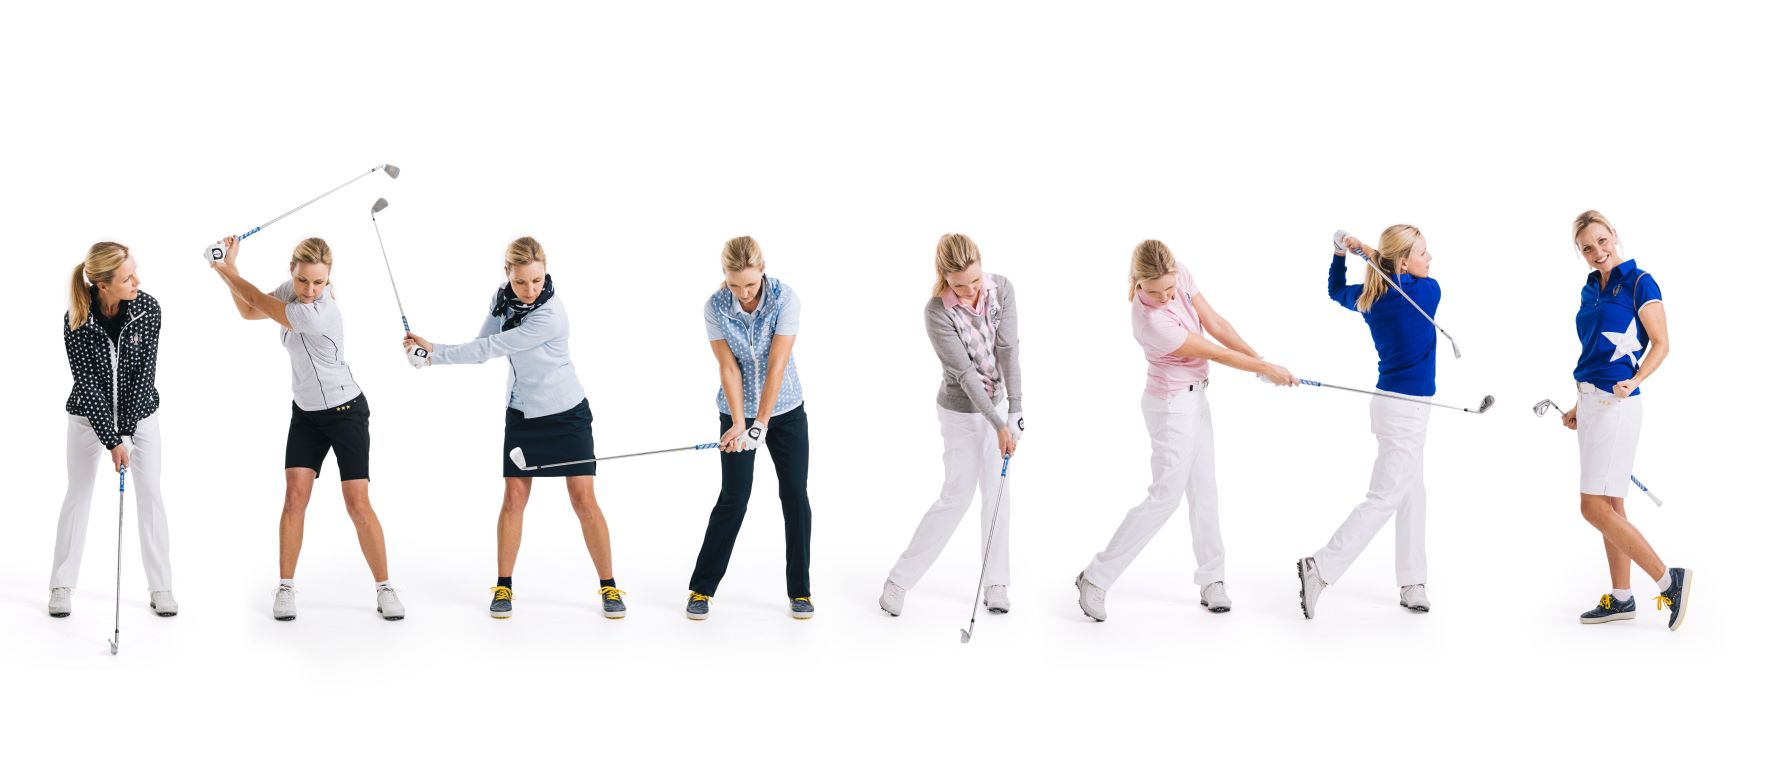 What to Wear Golf Tournament: Dress to Impress and Swing with Style